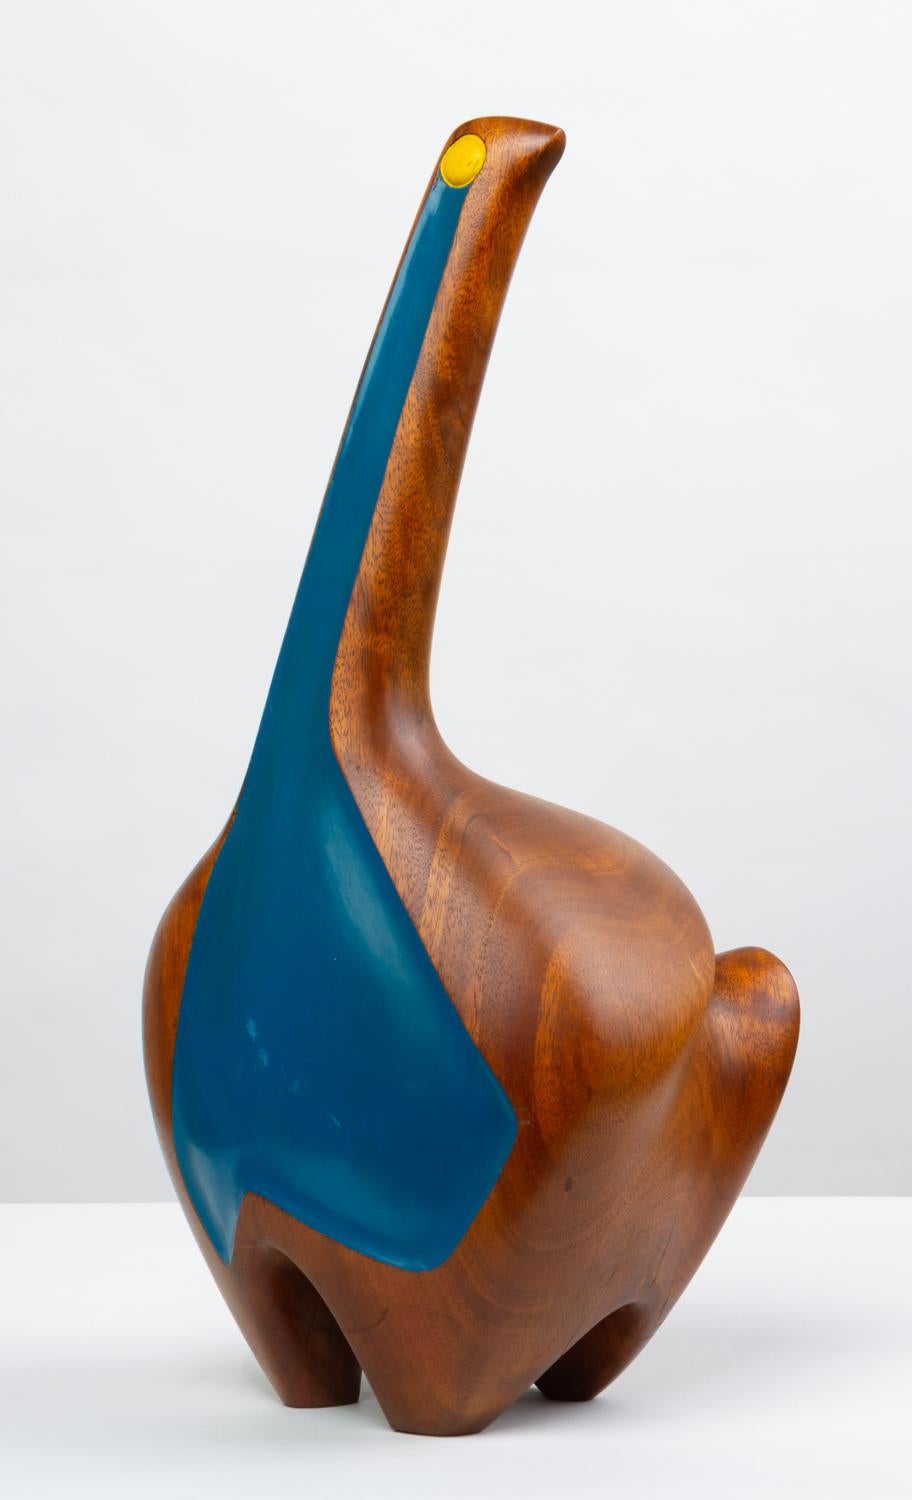 A large wooden sculpture by modern artist and woodworker, Carroll Barnes. A lumberjack educated at Cranbrook, Barnes often worked in large scale and his subject matter was drawn from American lore and natural beauty. On offer is a tall bird with a